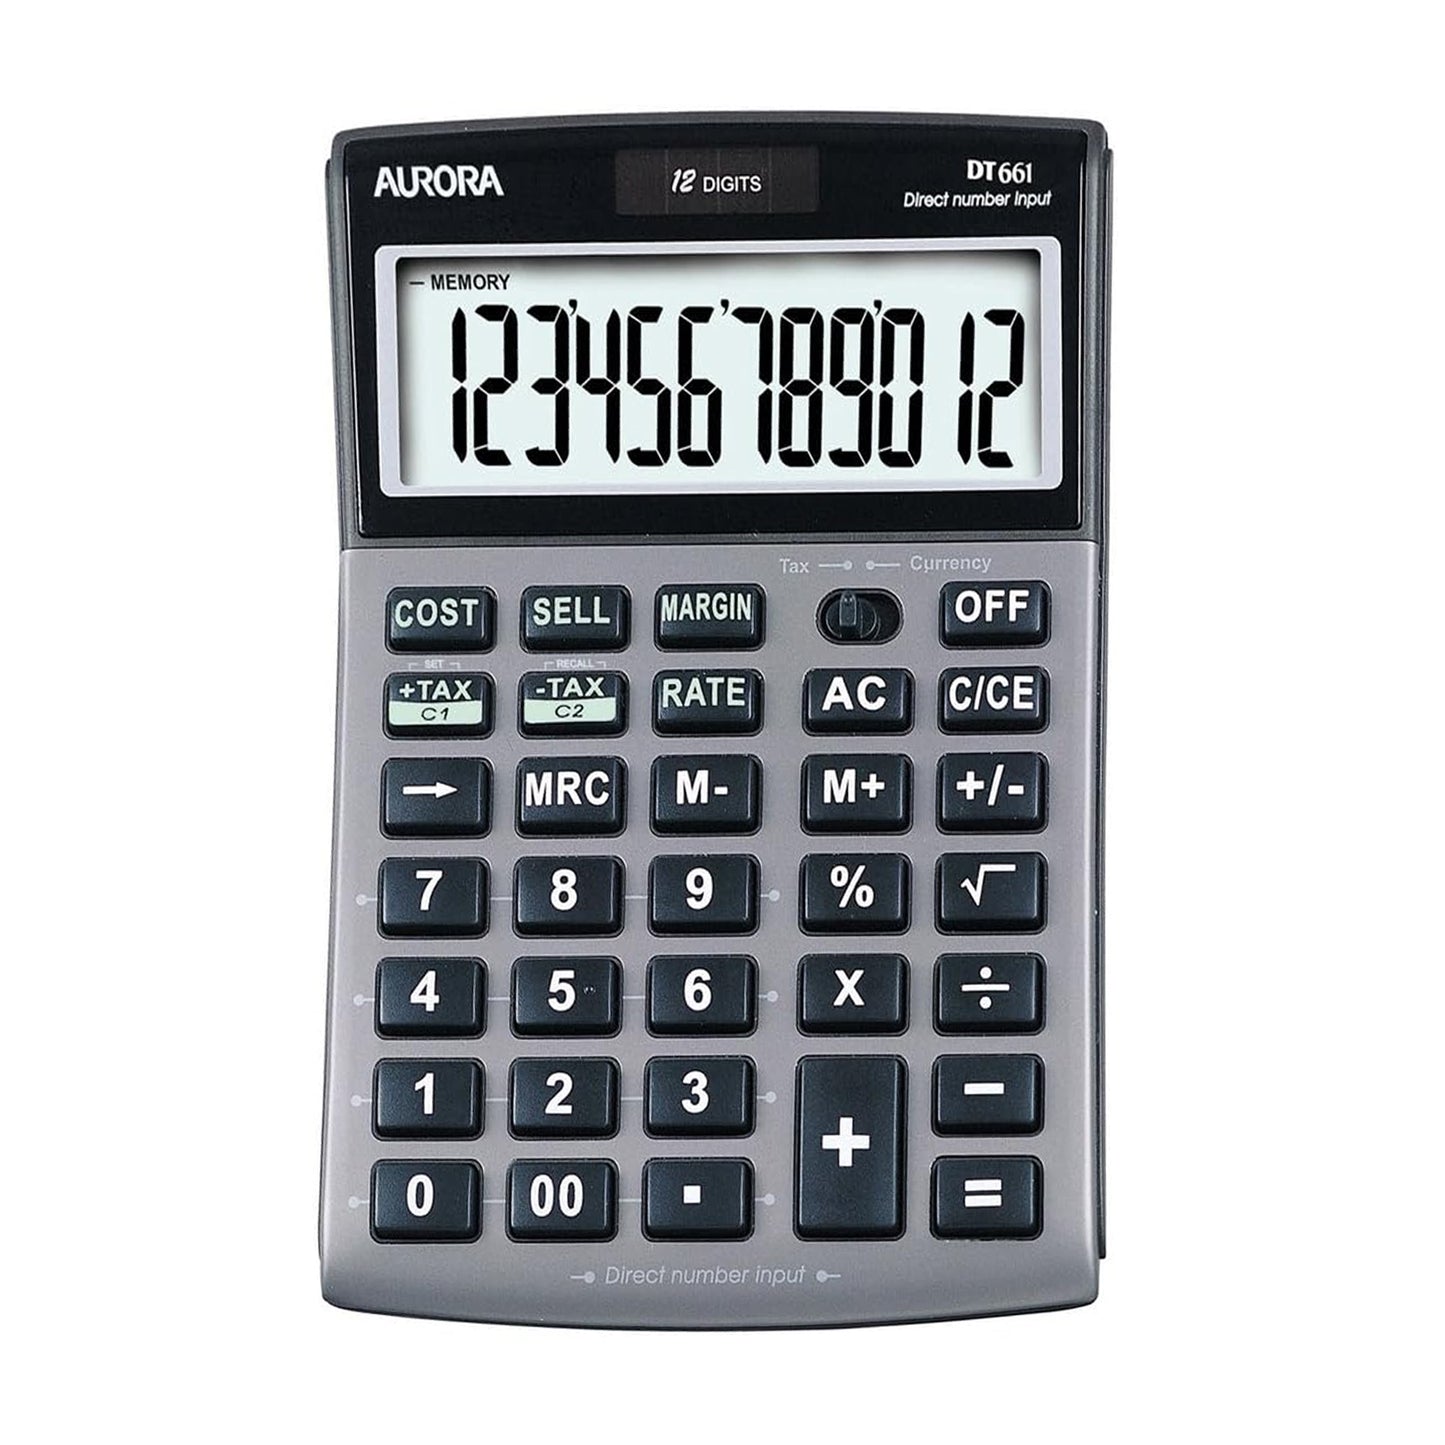 Aurora DT661 Business Calculator with Cost Sell Margin and Tax